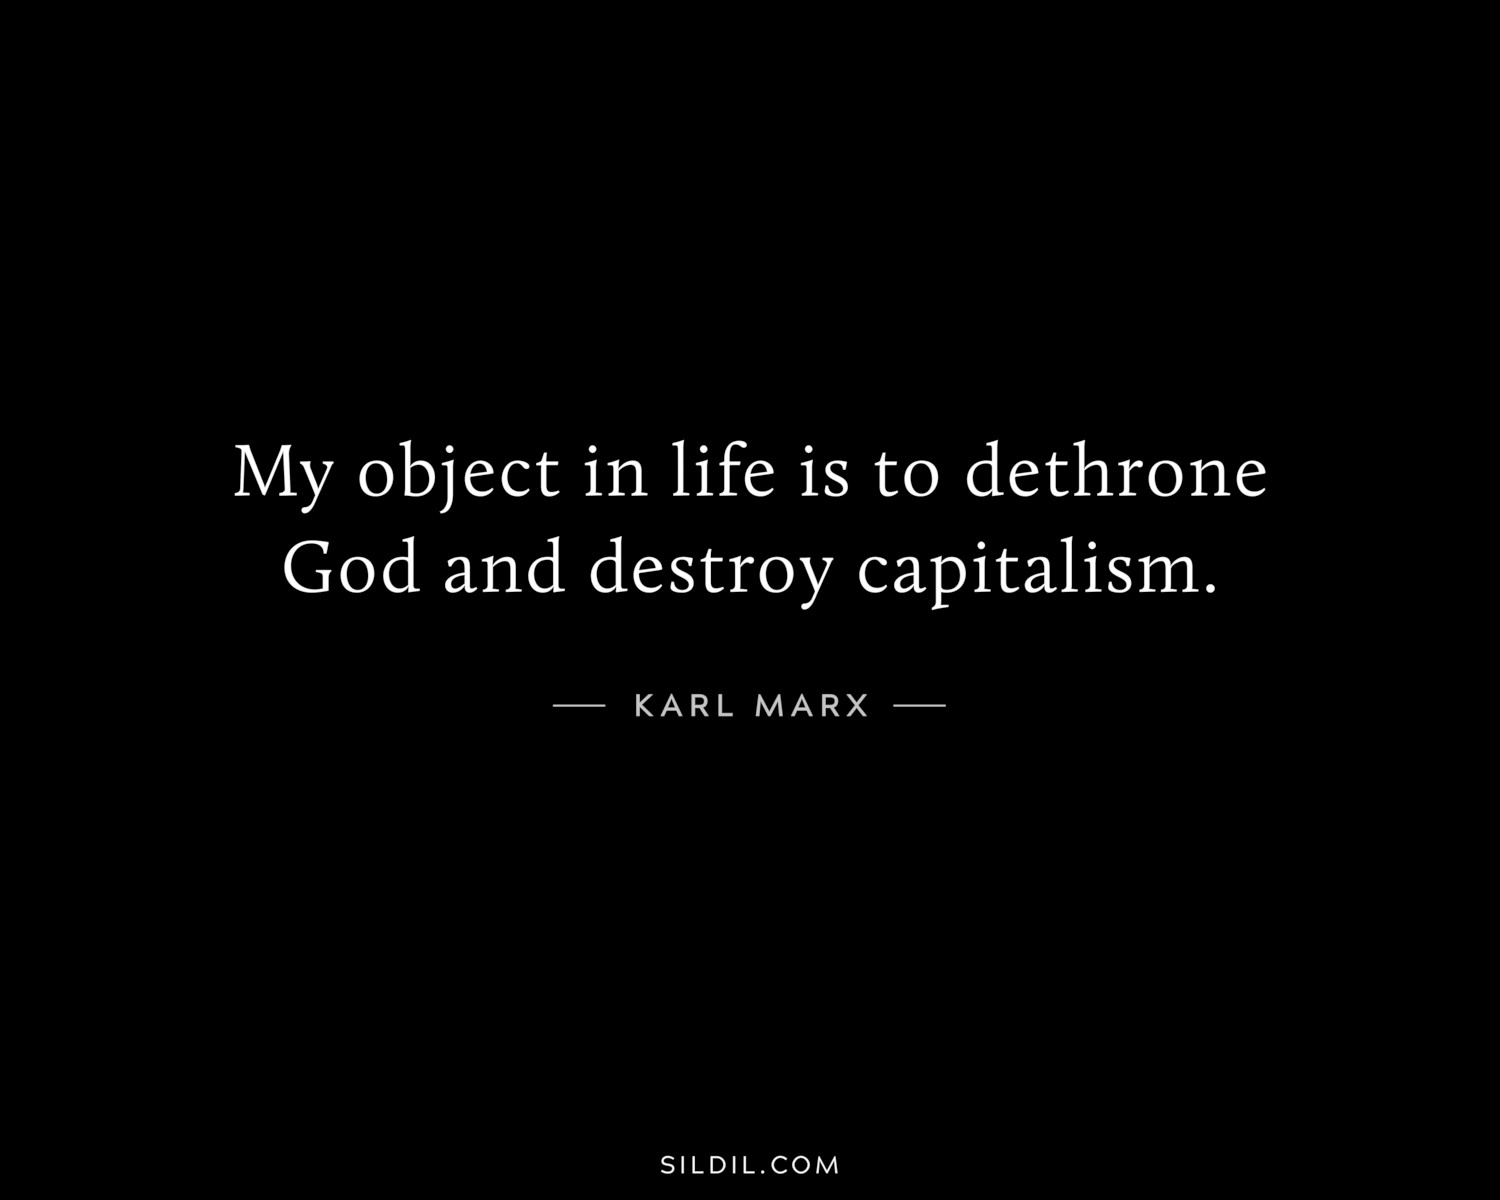 My object in life is to dethrone God and destroy capitalism.